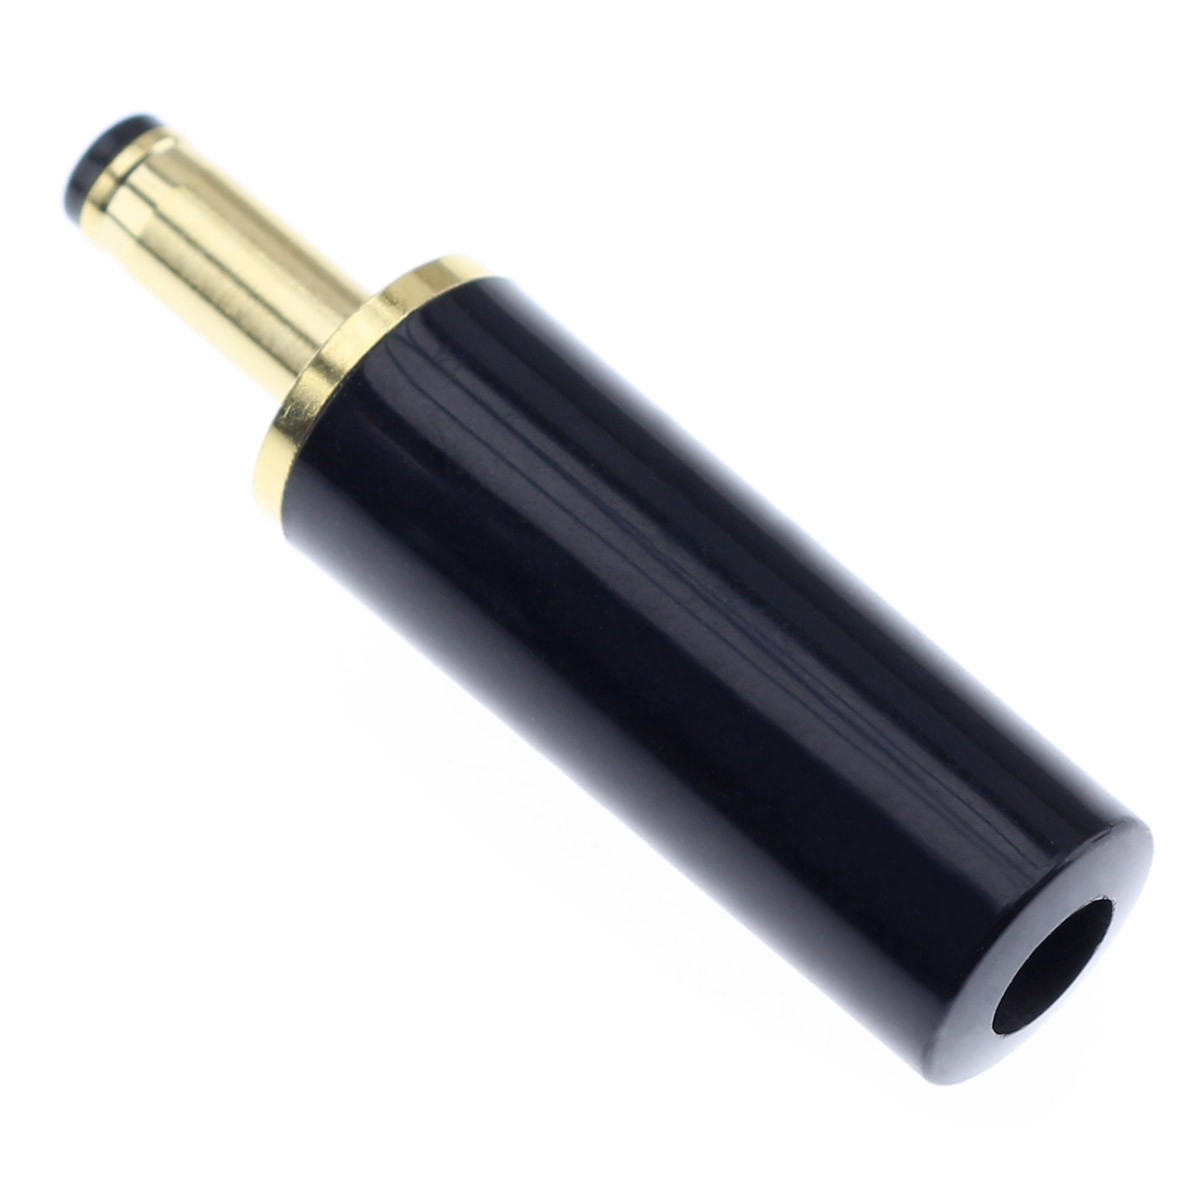 Male Jack DC 3.5 / 1.35mm Connector Gold Plated